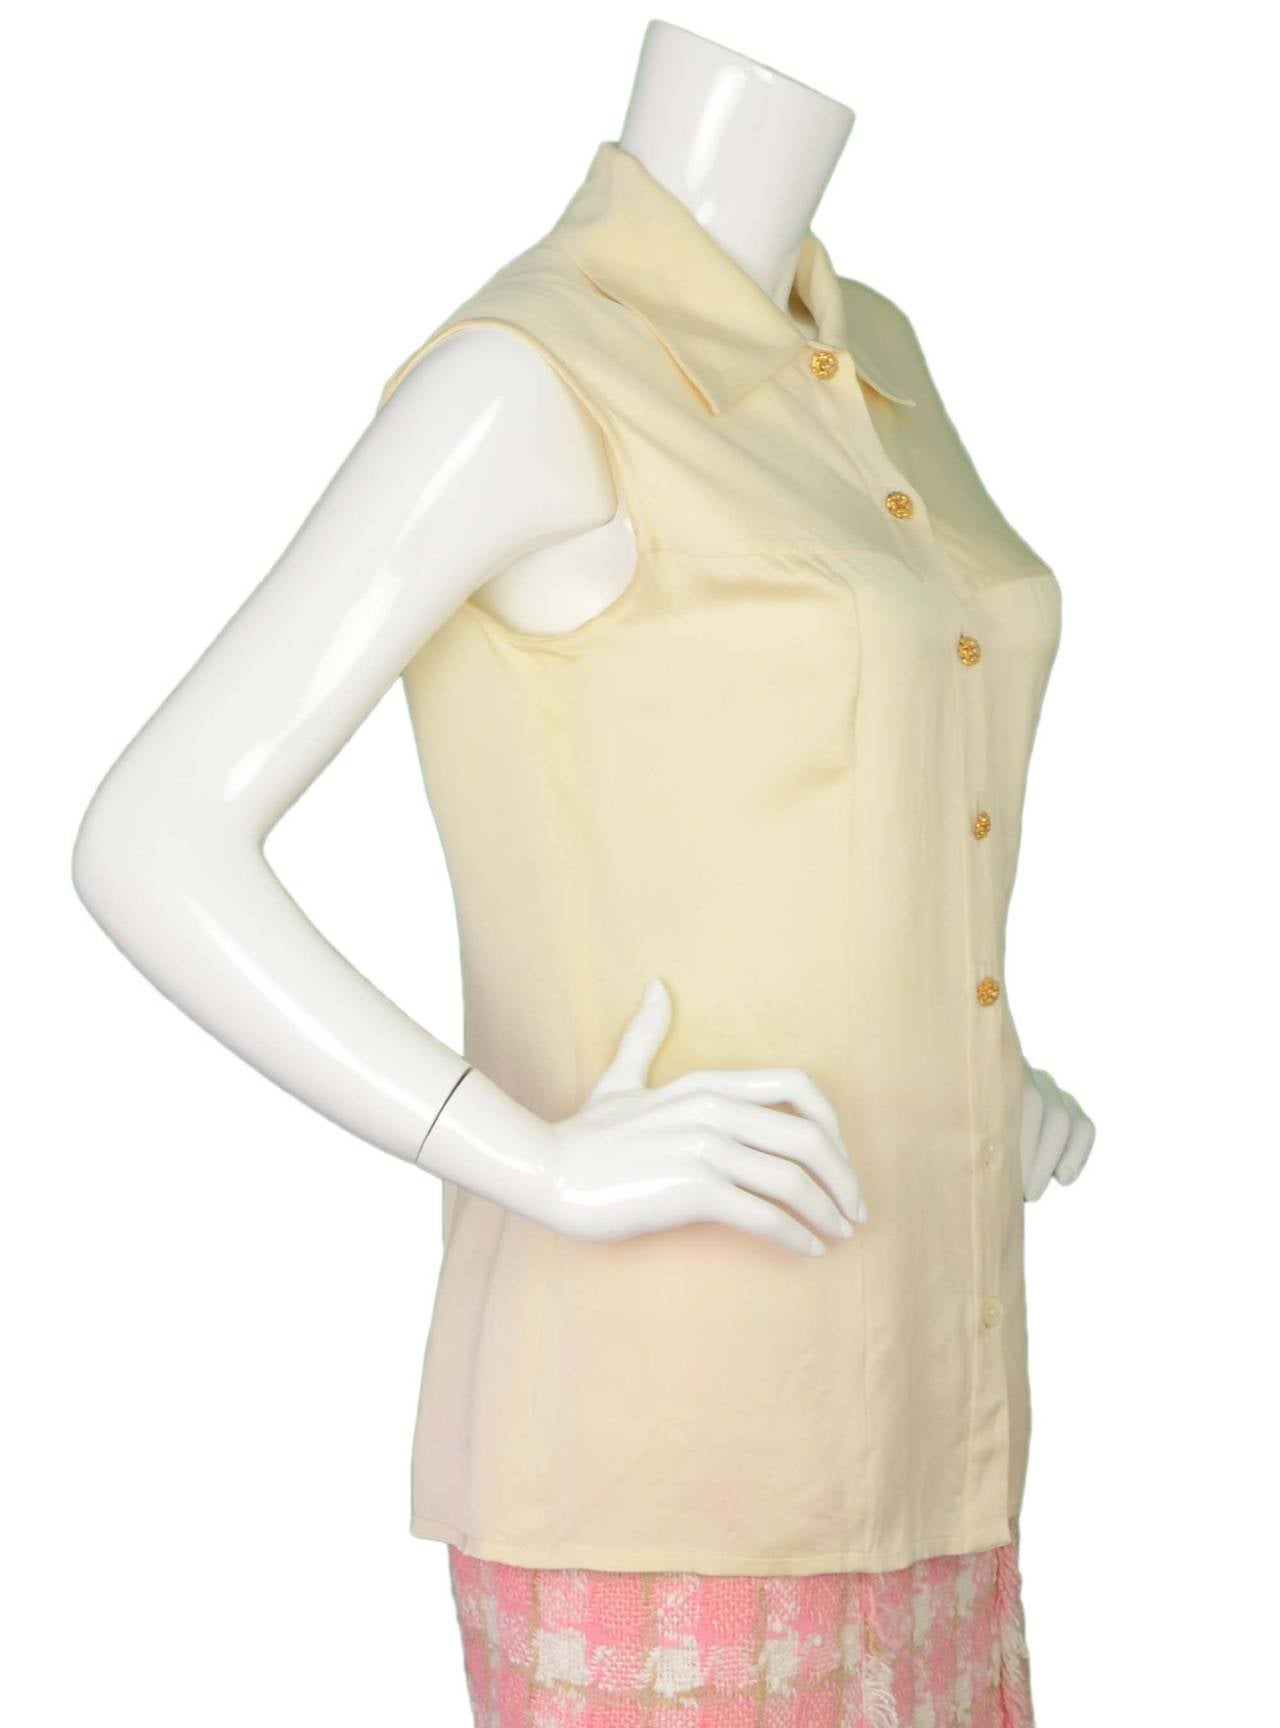 Chanel Beige Silk Sleeveless Button Down Top 
Features four goldtone camelia flower buttons with small pearl detailing in middle
Color: Beige and goldtone
Composition: Not given- believed to be 100% silk
Lining: None
Closure/opening: Front